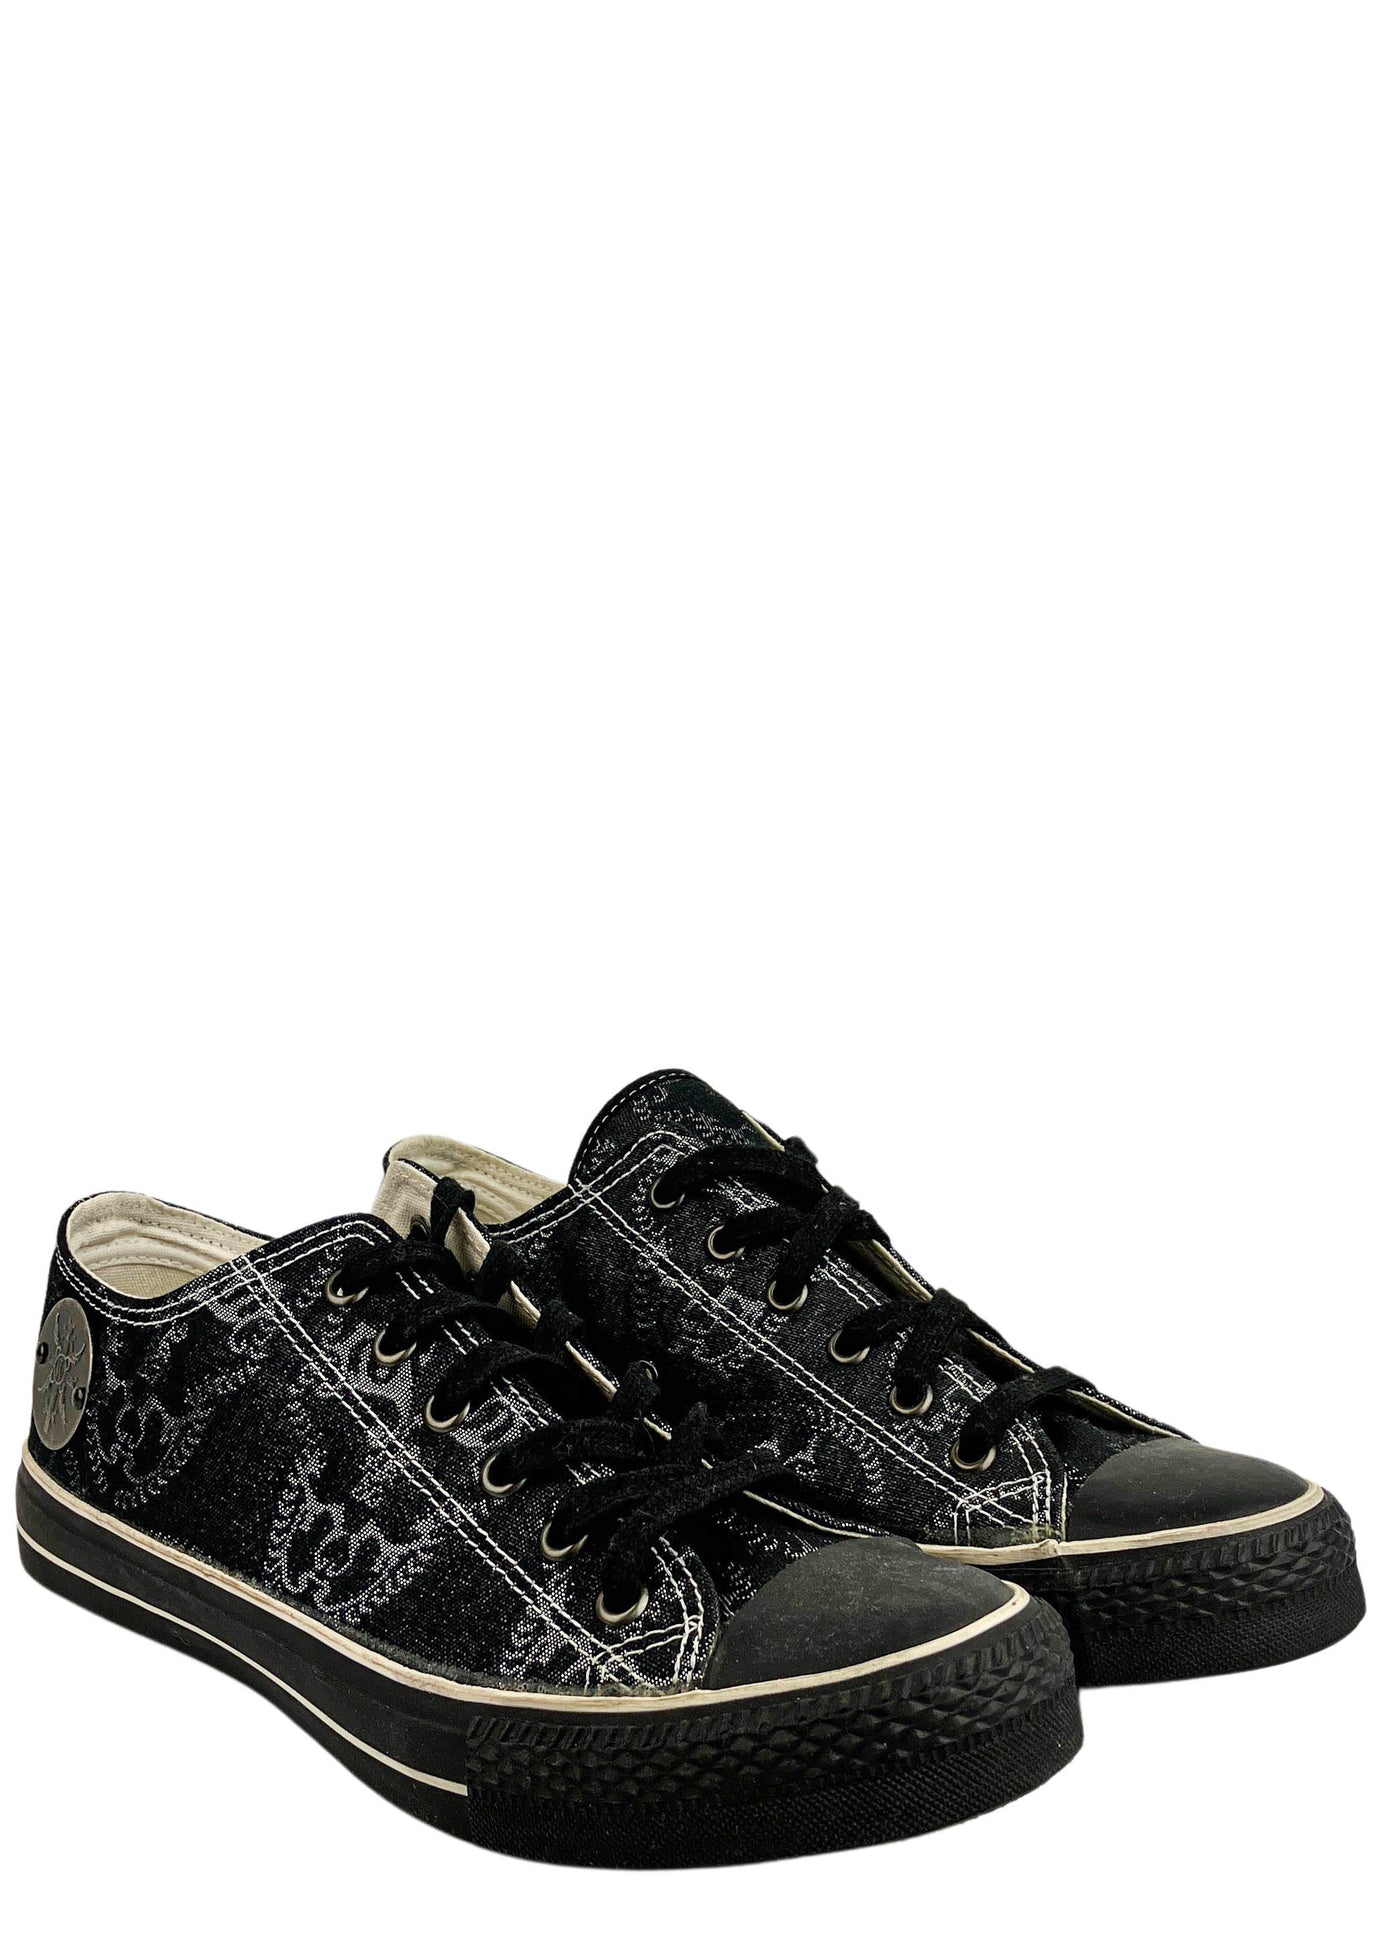 Thomas Wylde Sold Out Sneakers in Black - Discounts on Thomas Wylde at UAL